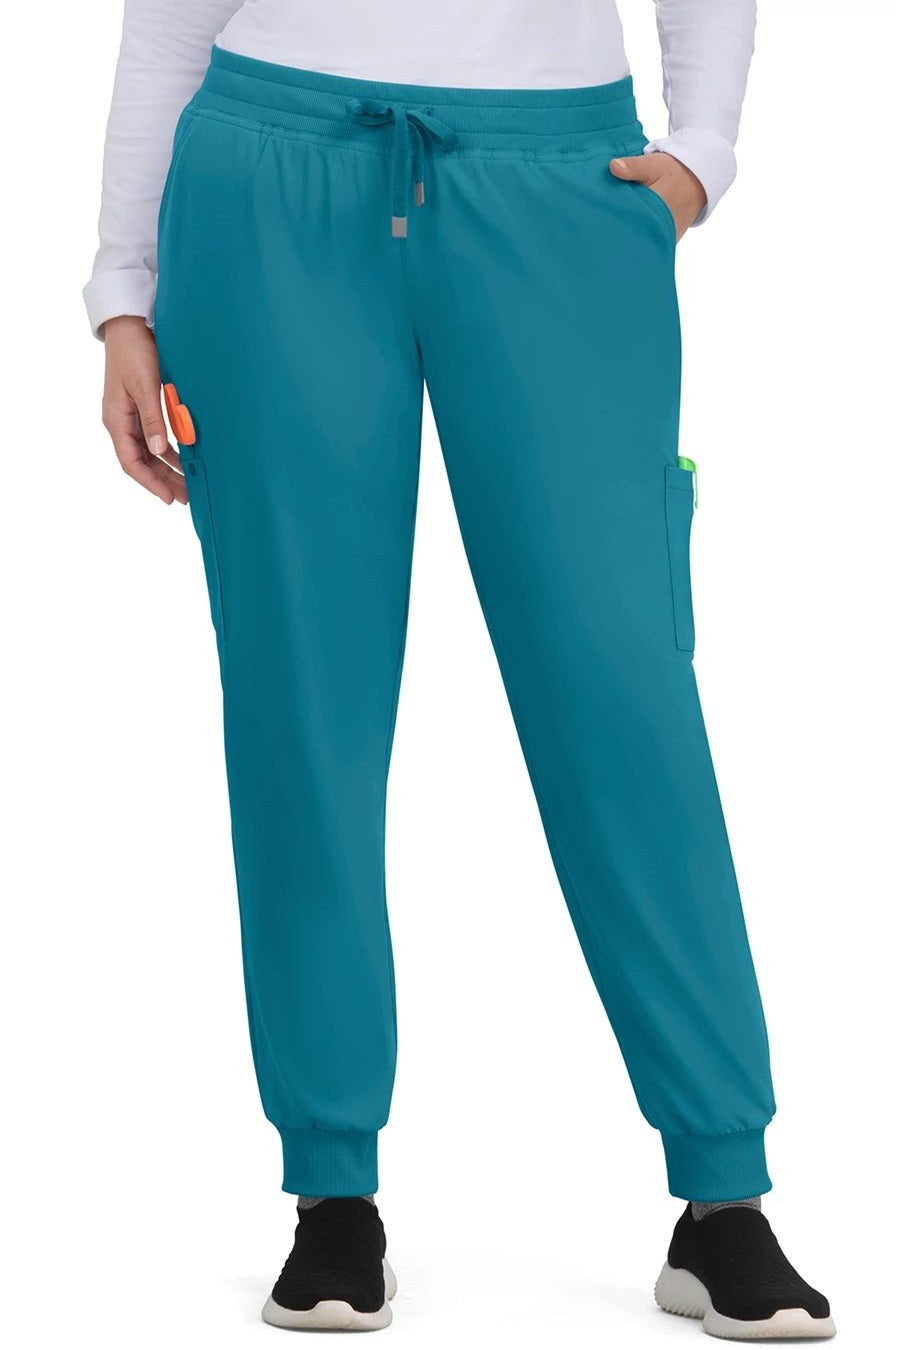 koi Scrub Pants Cureology Pulse Petite Jogger in Wine at Parker's Clothing and Shoes.